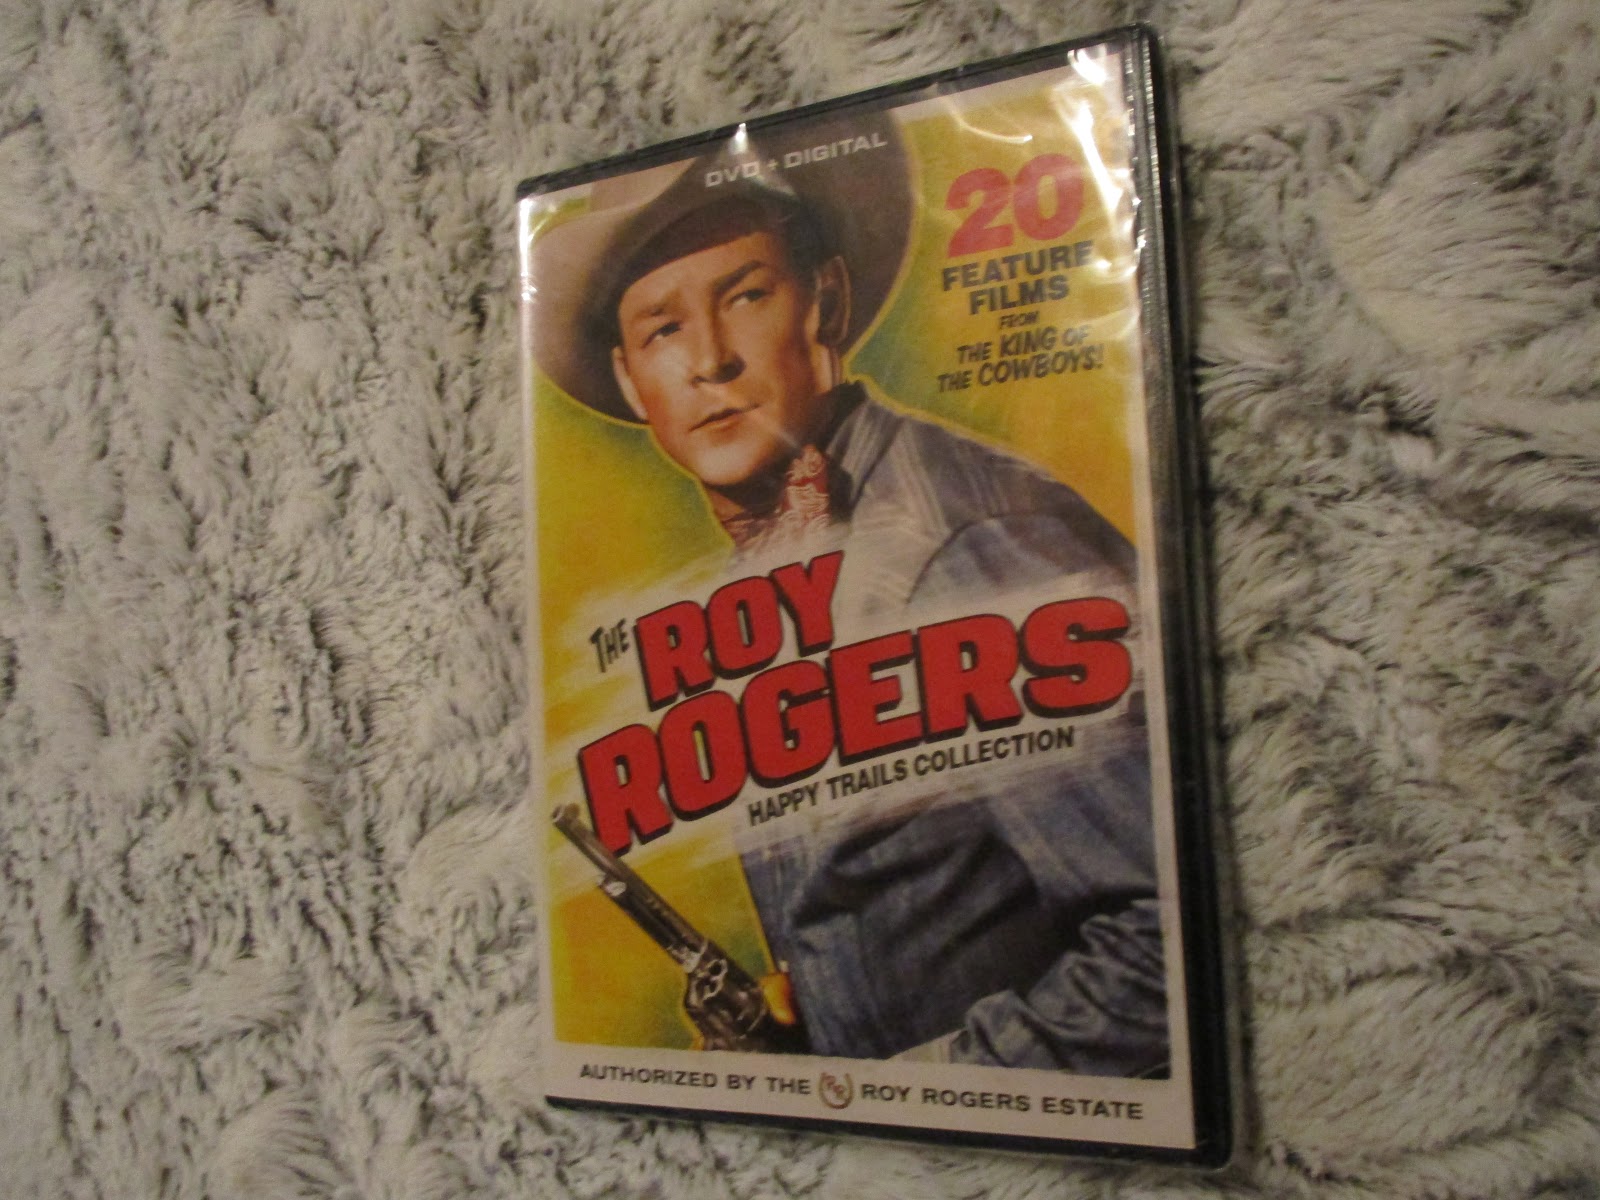 Missy's Product Reviews : The Roy Rogers Happy Trails Collection